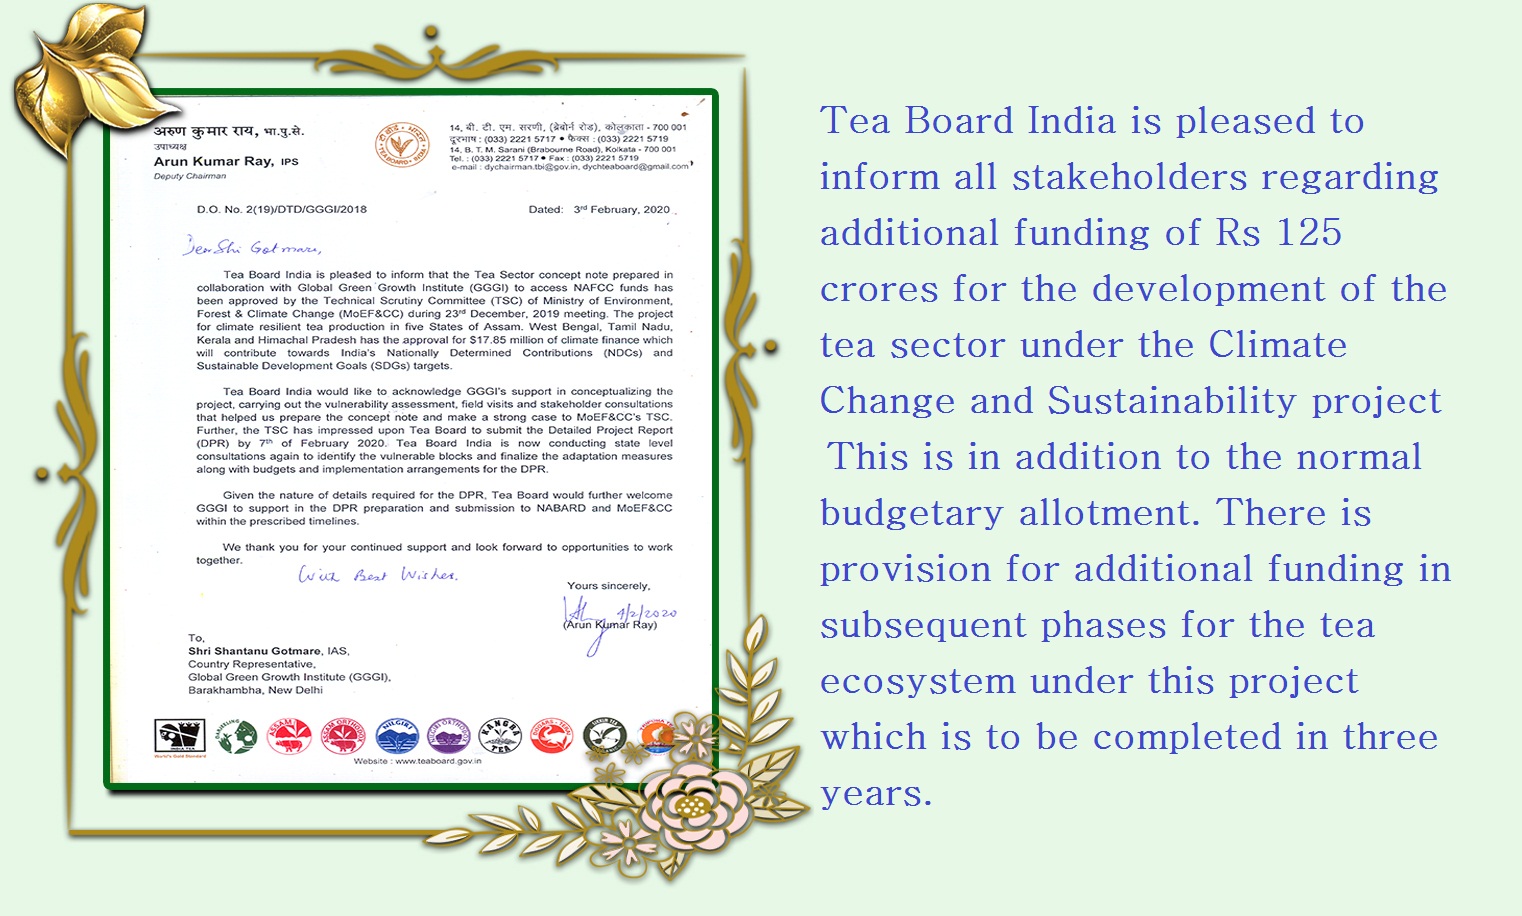 Tea Board India is pleased to inform all tea stakeholders regarding additional funding of Rs 125 crore for the development of tea sector under the Climate Change and Sustainability project.